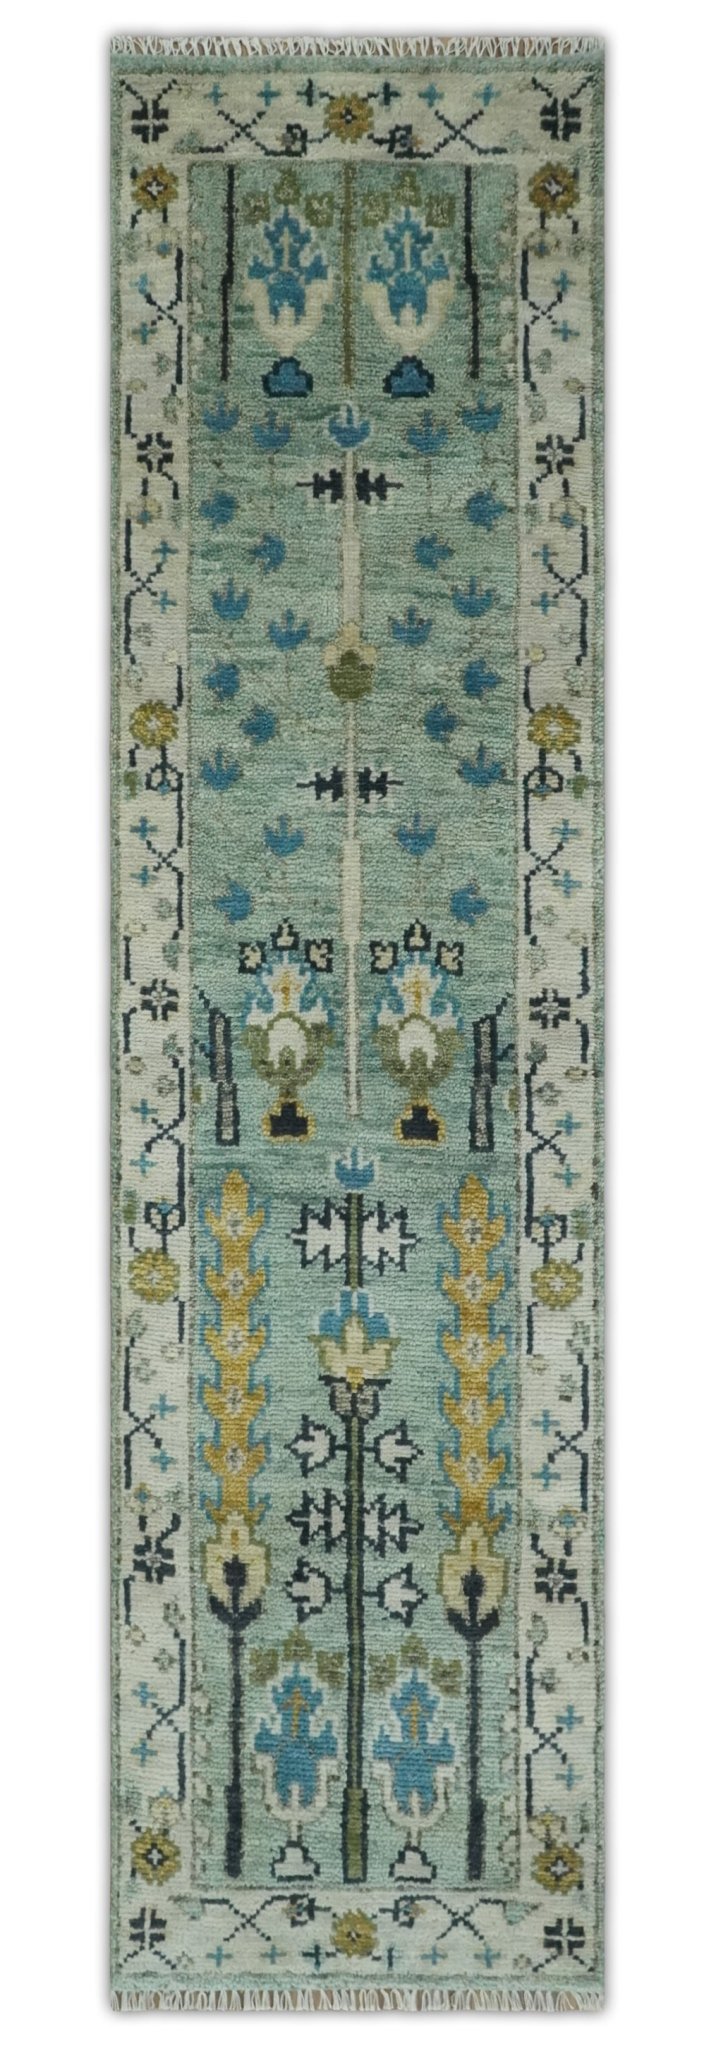 Ready to Ship 8x10, 9x12 Aqua and Ivory Tree Design Hand Knotted Wool Area Rug - The Rug Decor